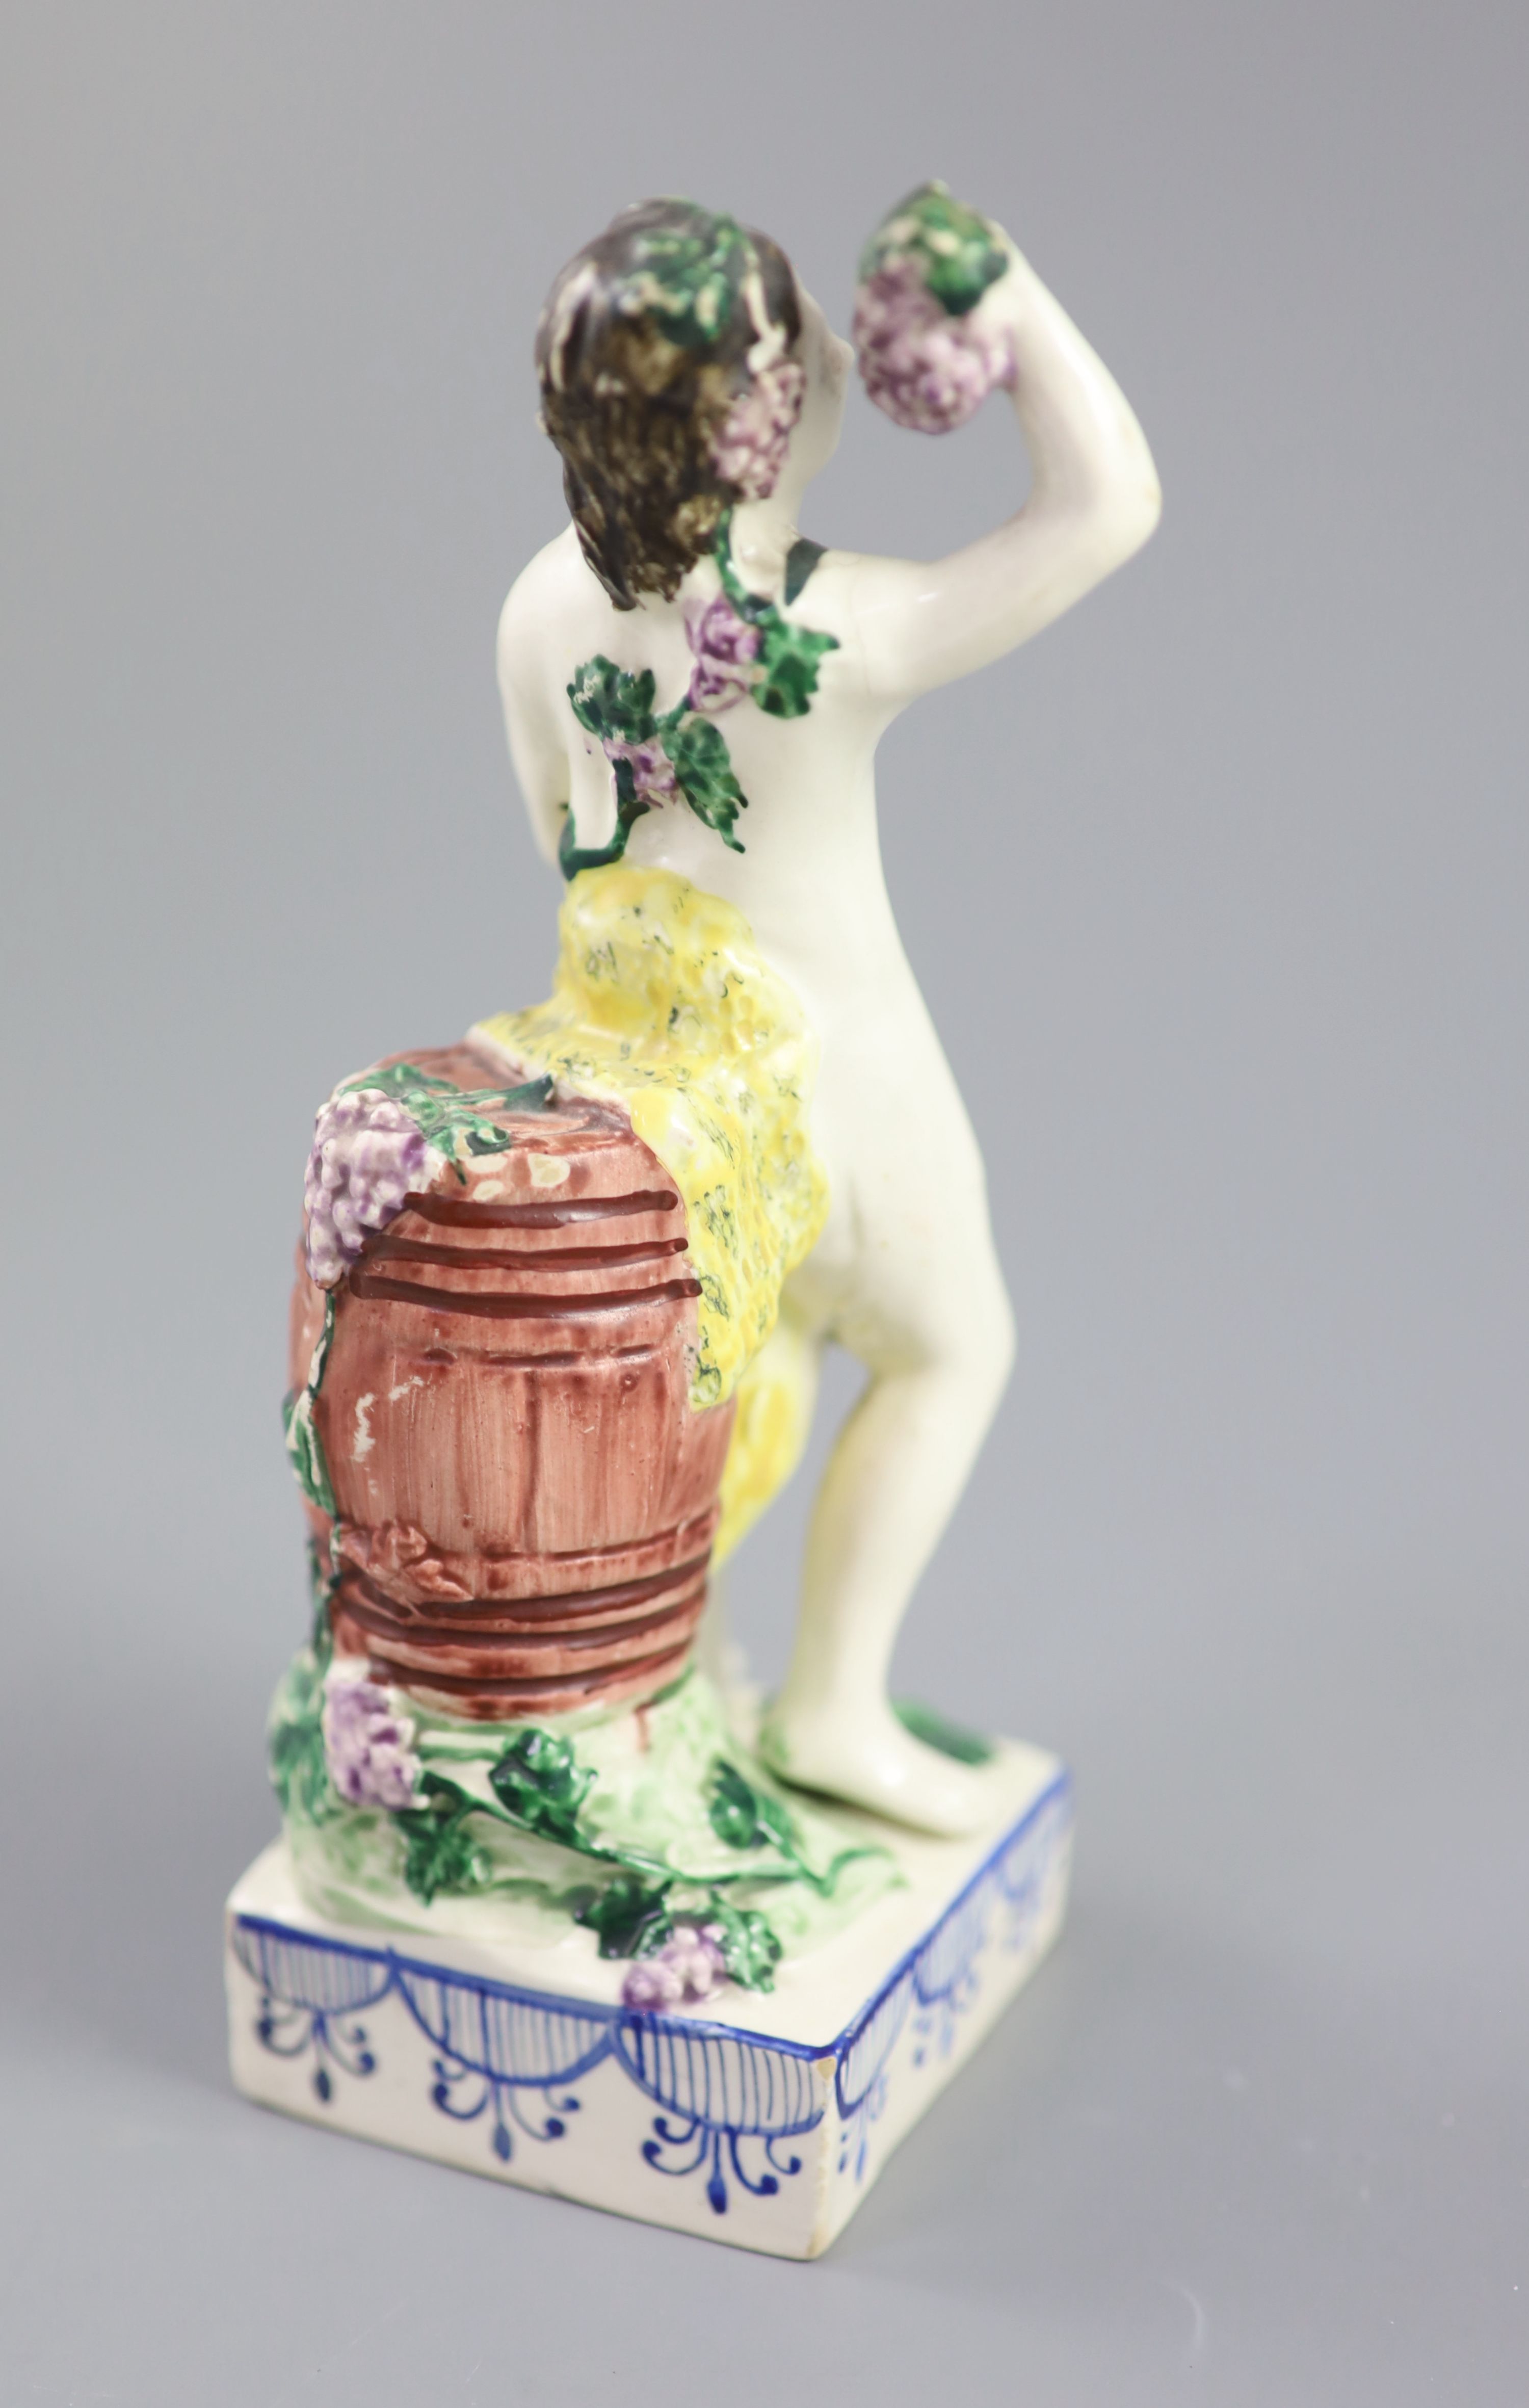 An enamelled creamware figure of Bacchus, attributed Leeds Pottery, c.1790-1800, standing by wine - Image 3 of 4